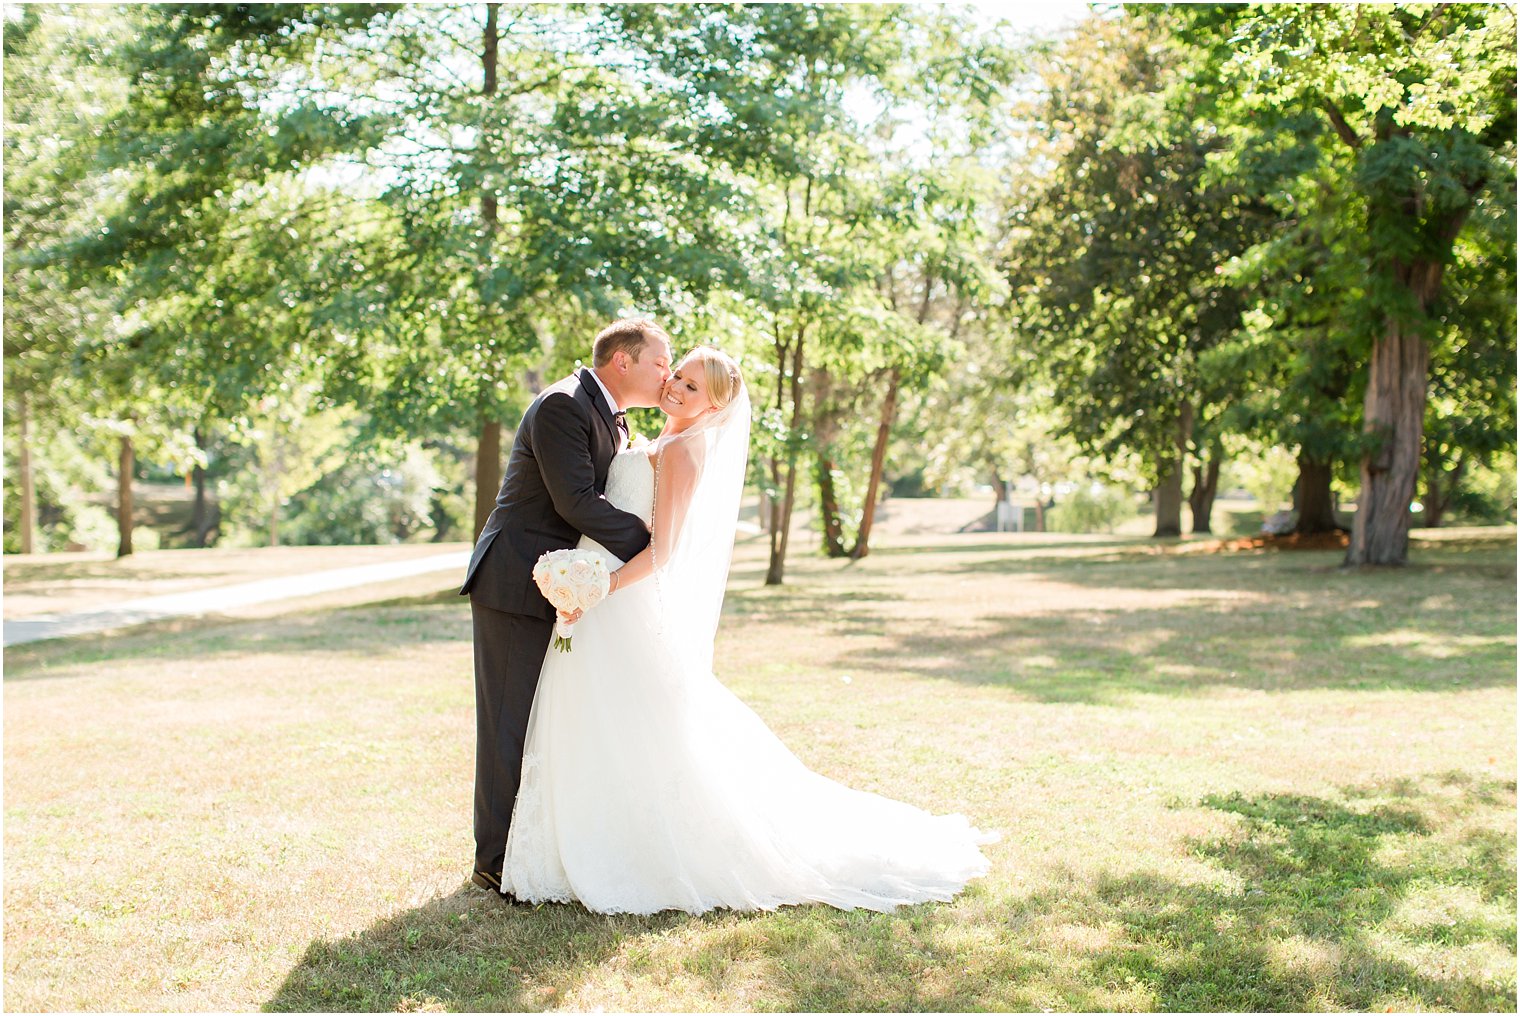 Gorgeous light during bride and groom photos